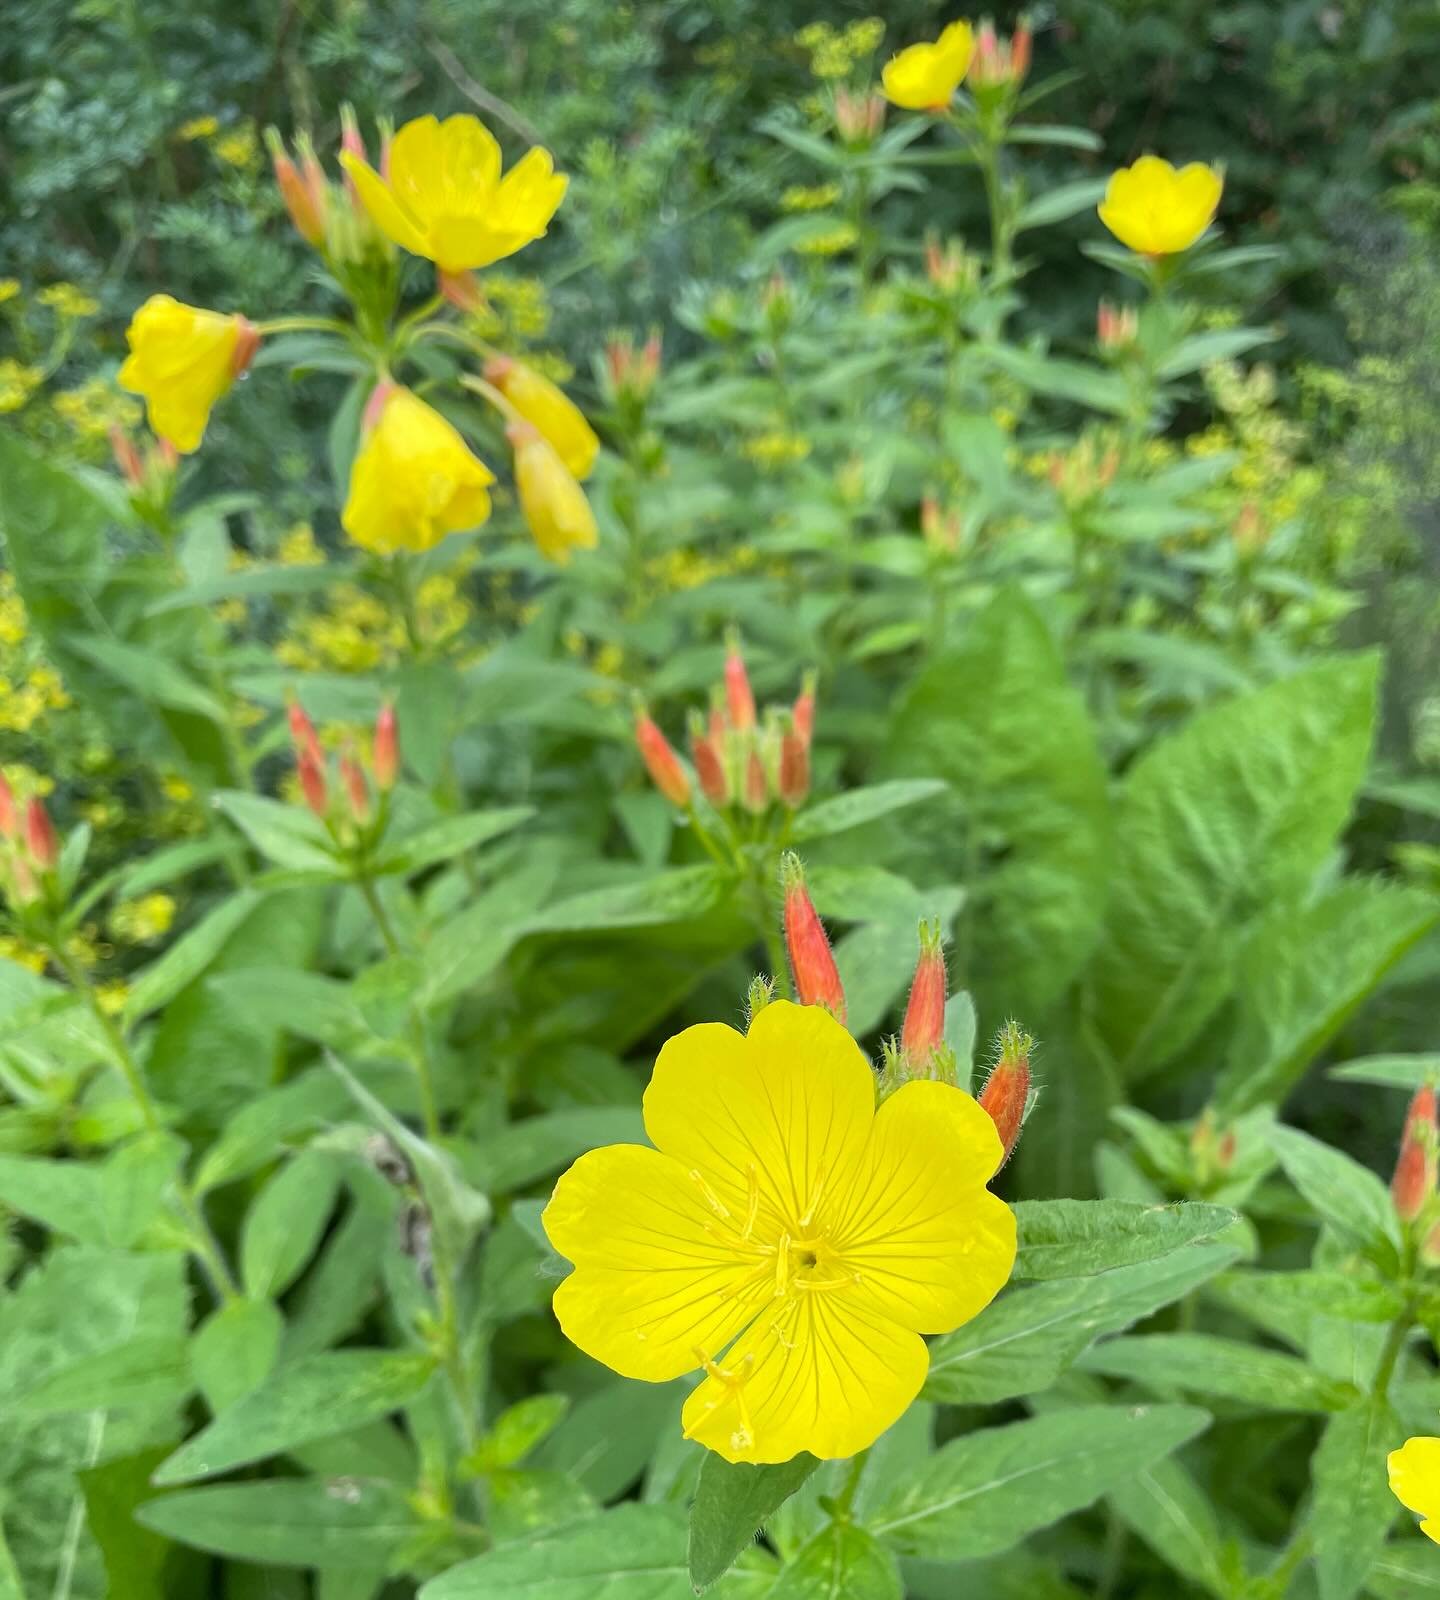 Sundrops, Oenothera fruticosa, are bursting out after this rainy week! 

I am hoping the sun will also be out this weekend. We have lots more flowers for market this Saturday. And this Sunday are our last scheduled open nursery hours of the spring. N